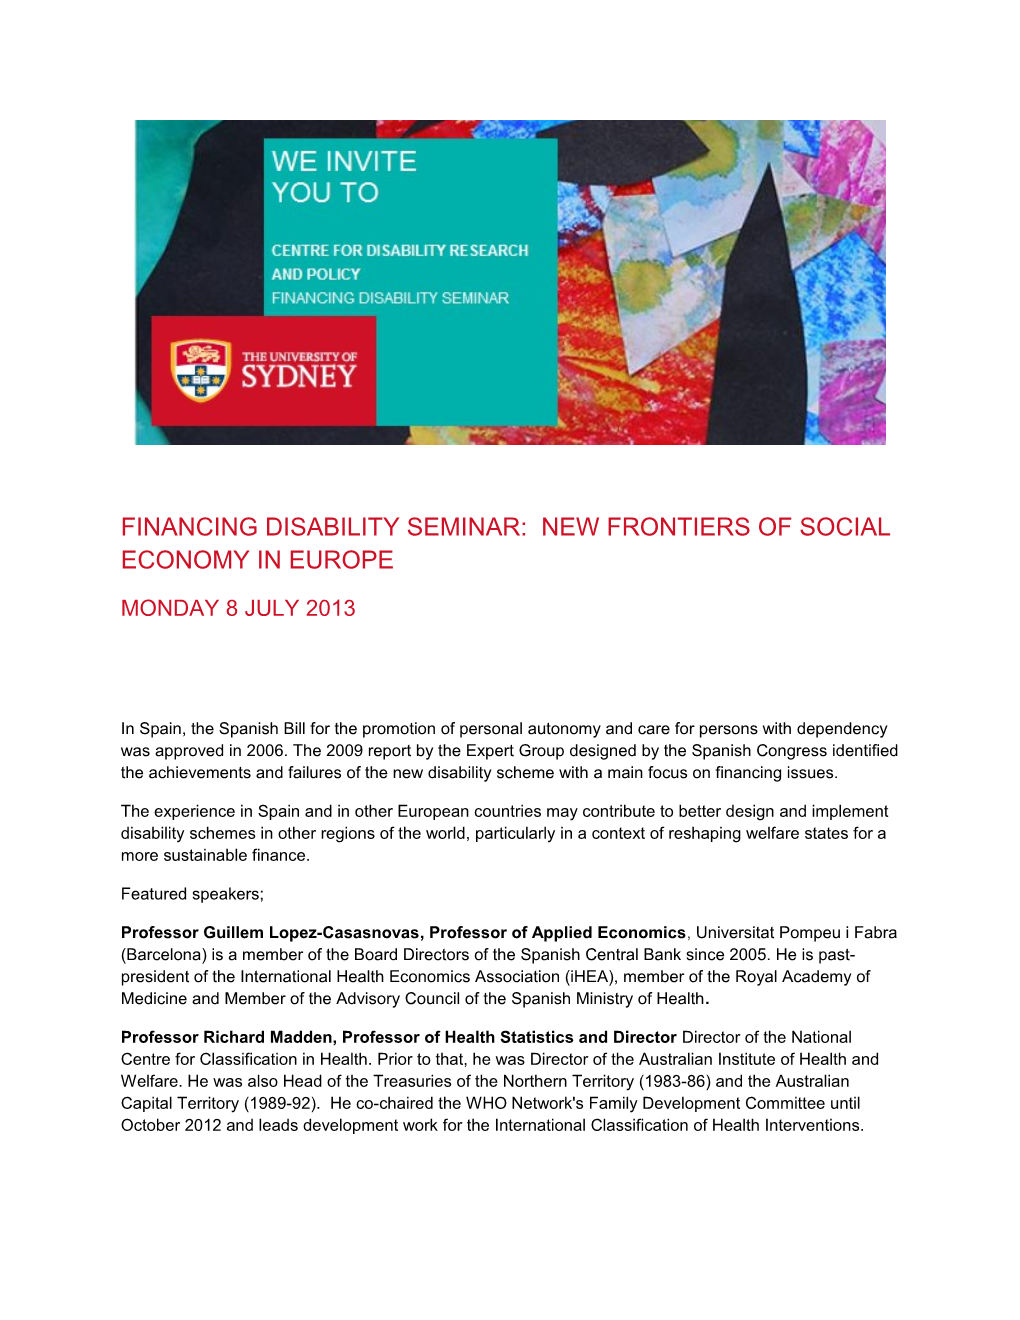 Financing Disability Seminar: New Frontiers of Social Economy in Europe